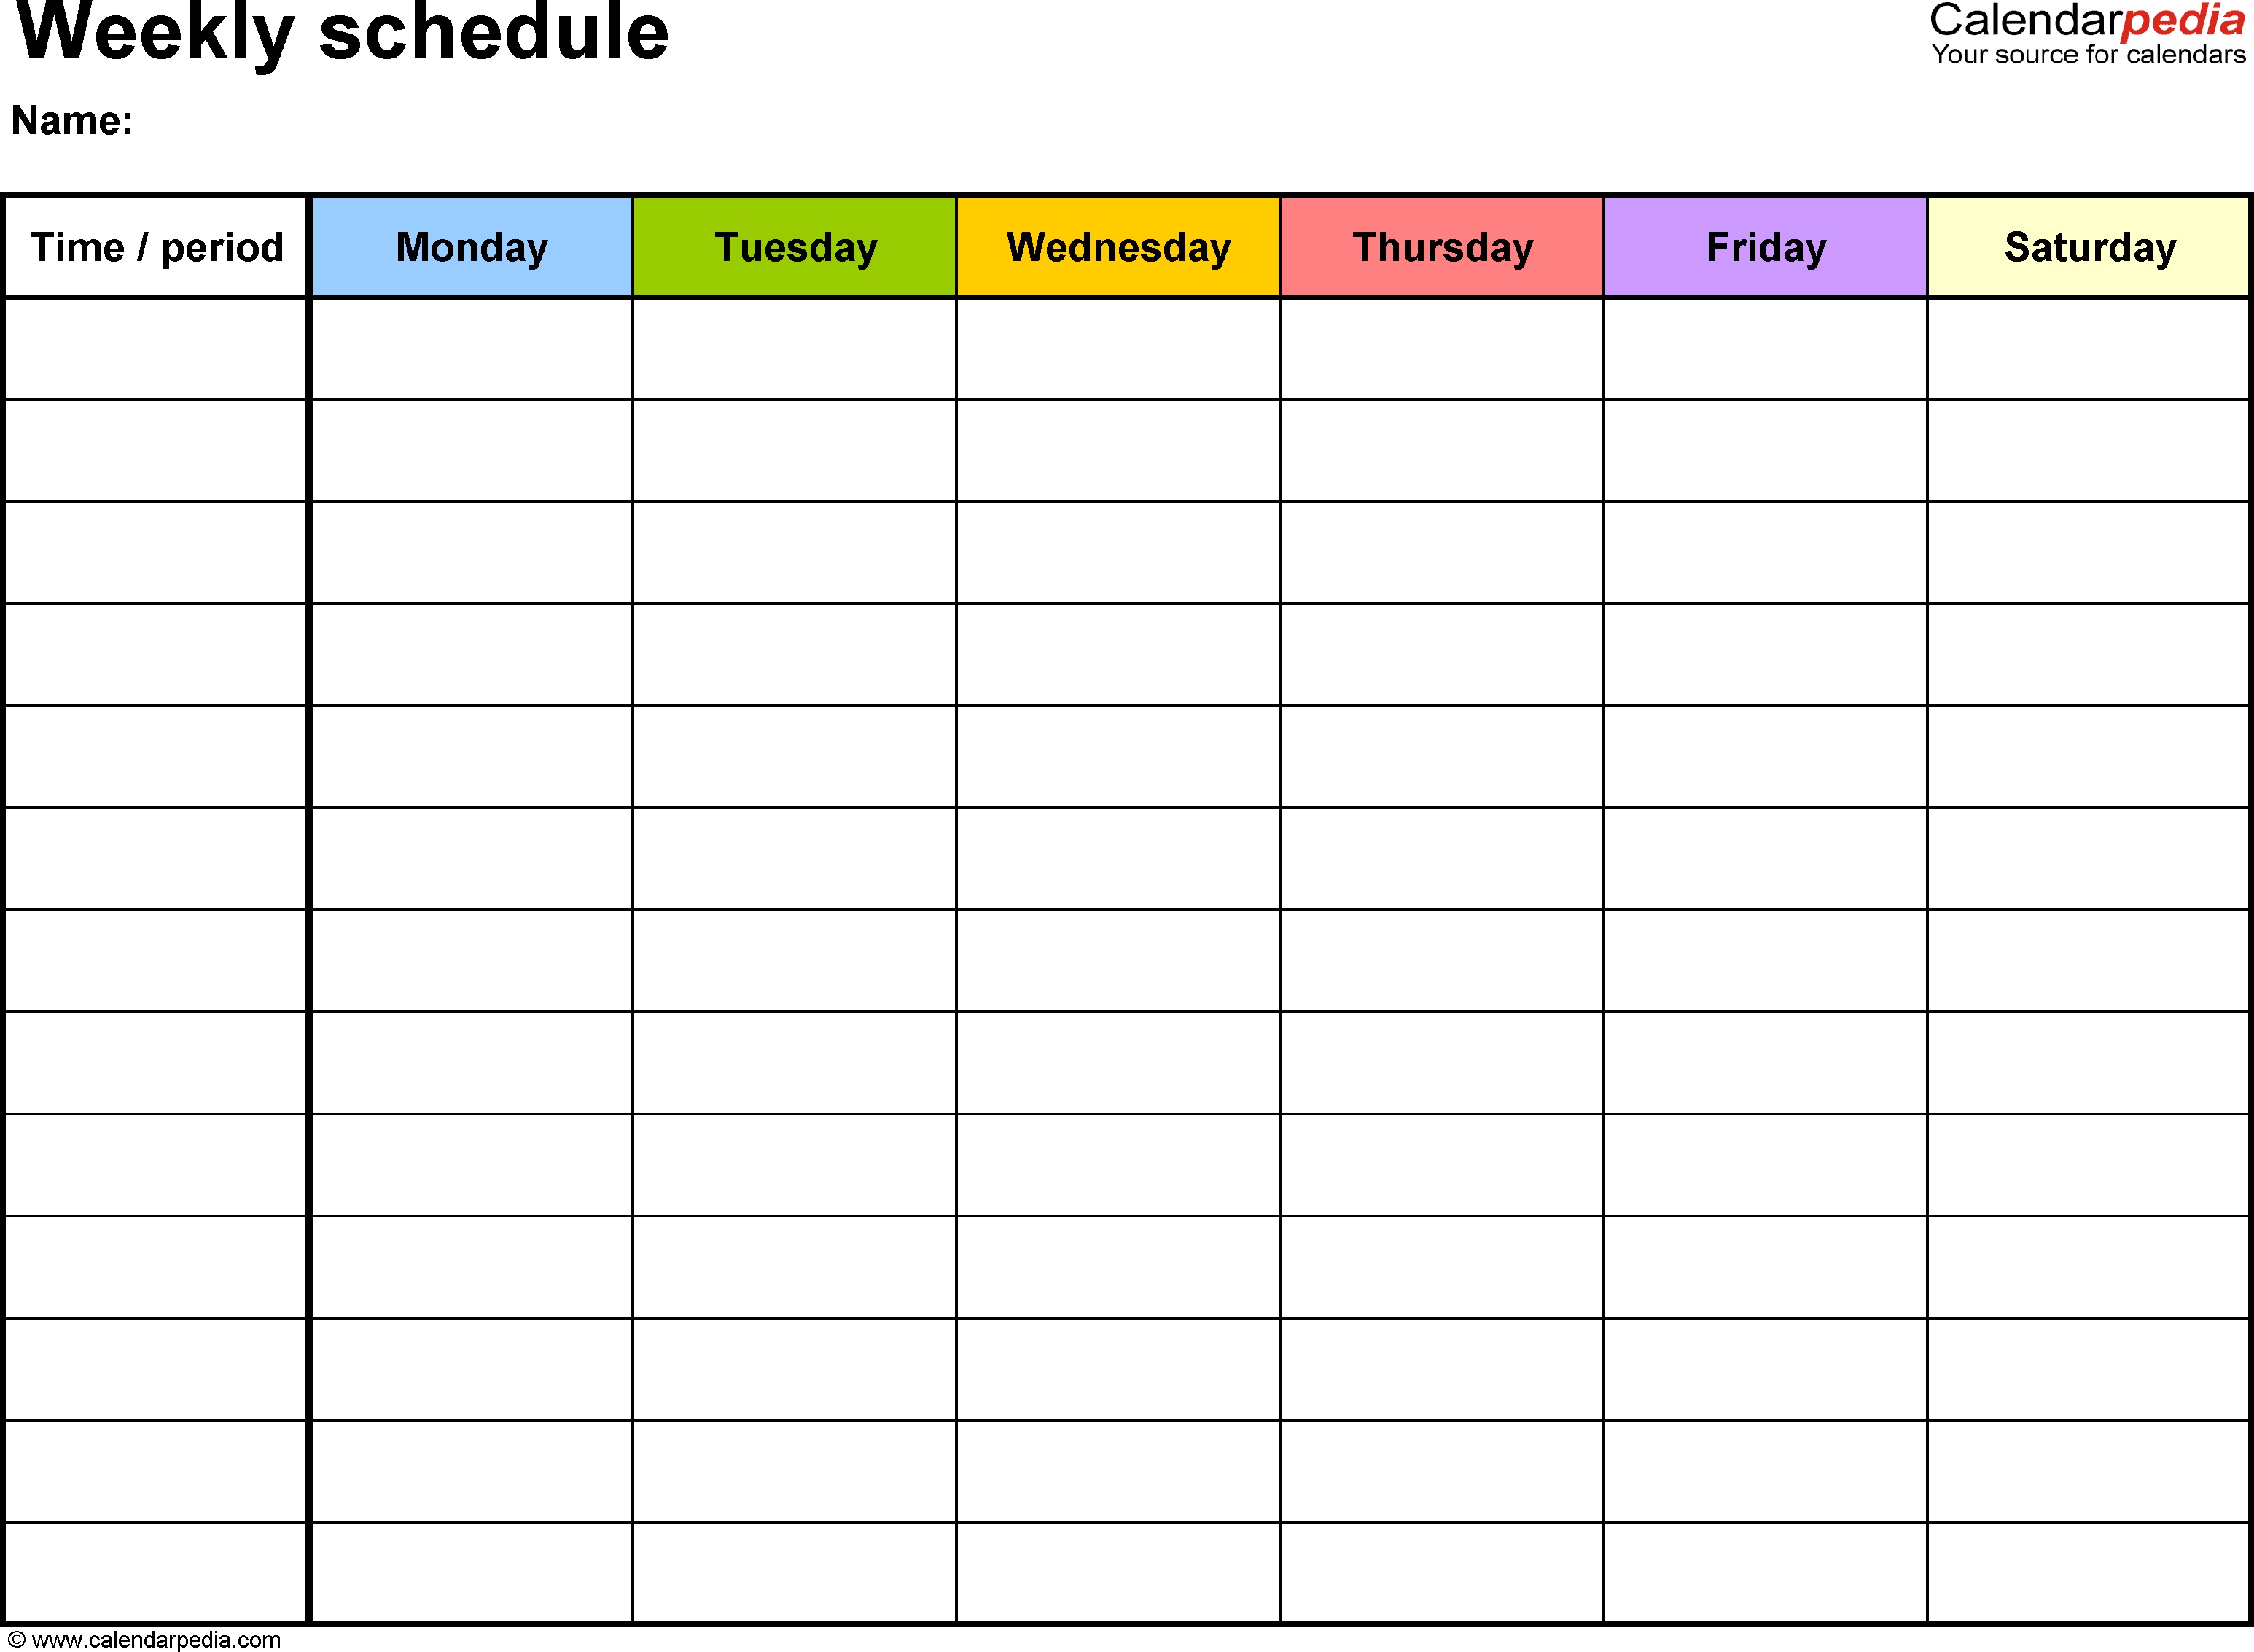 Free Weekly Schedule Templates For Word - 18 Templates To Fill In Blank Calendar Monday Friday